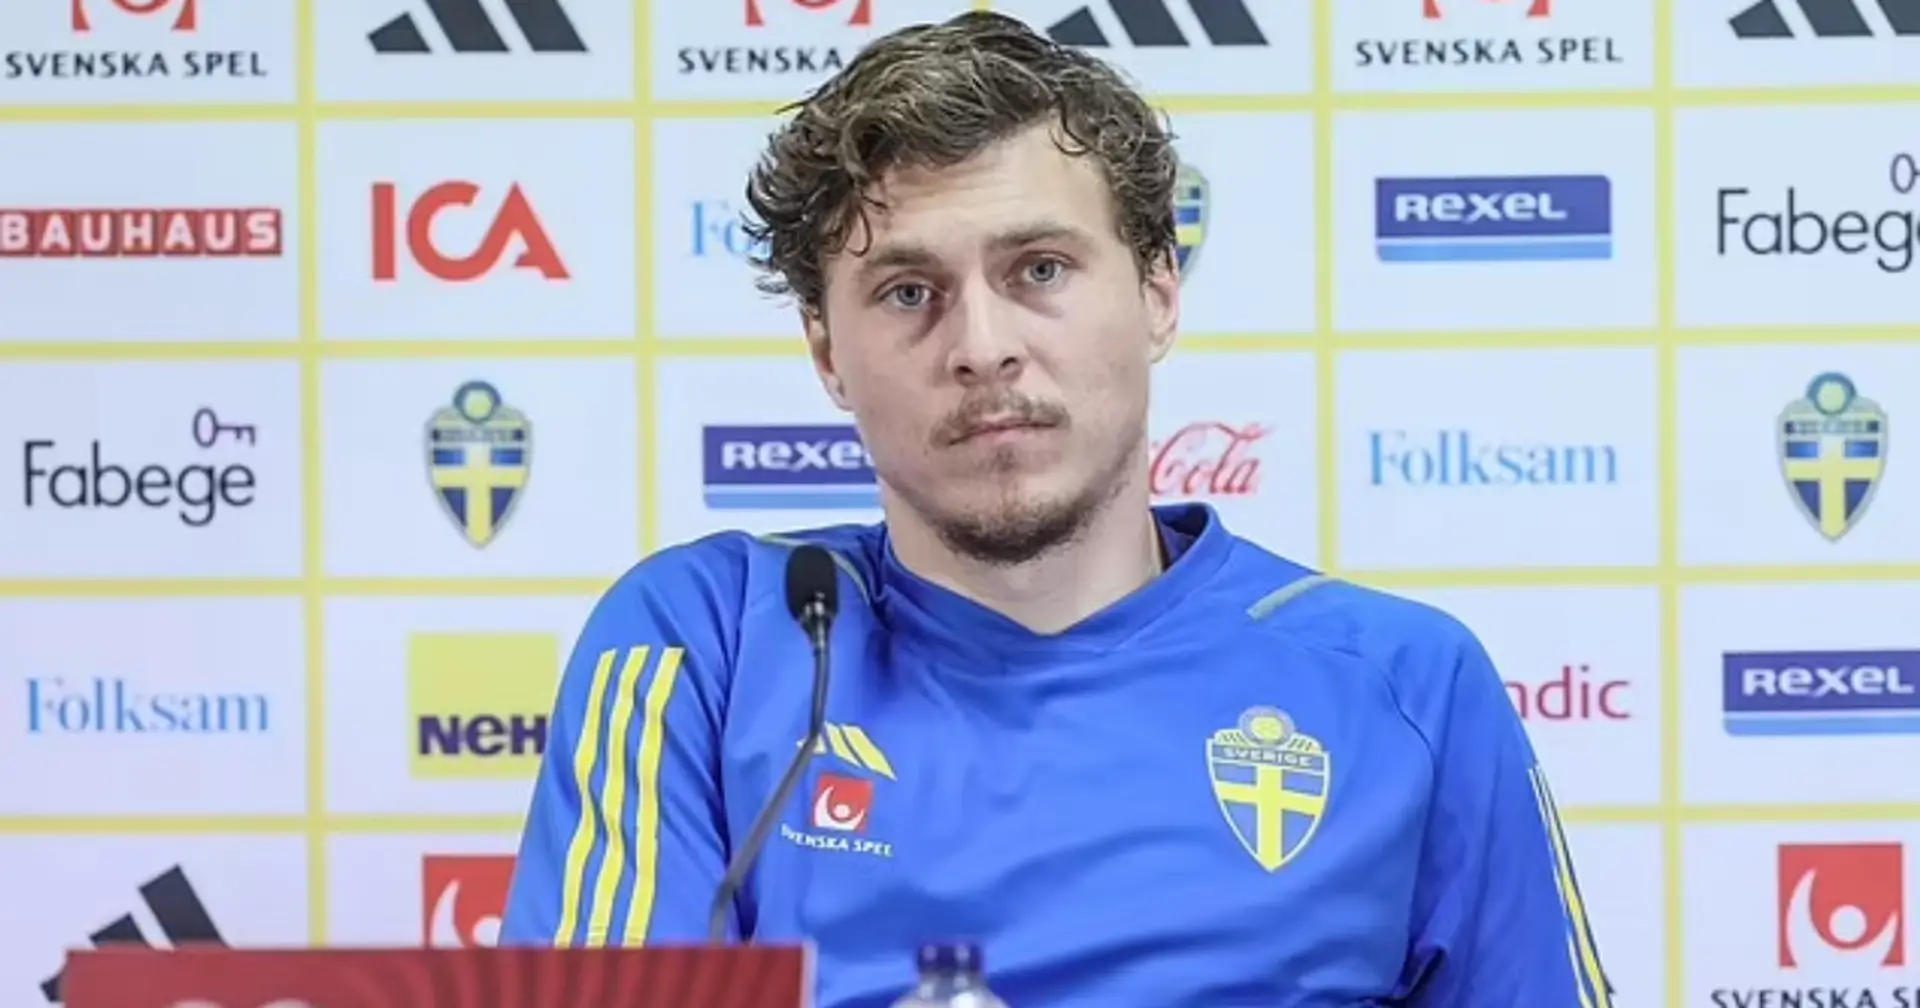 'We were very clear that we didn't want to continue': Victor Lindelof speaks out on Brussels terror attack